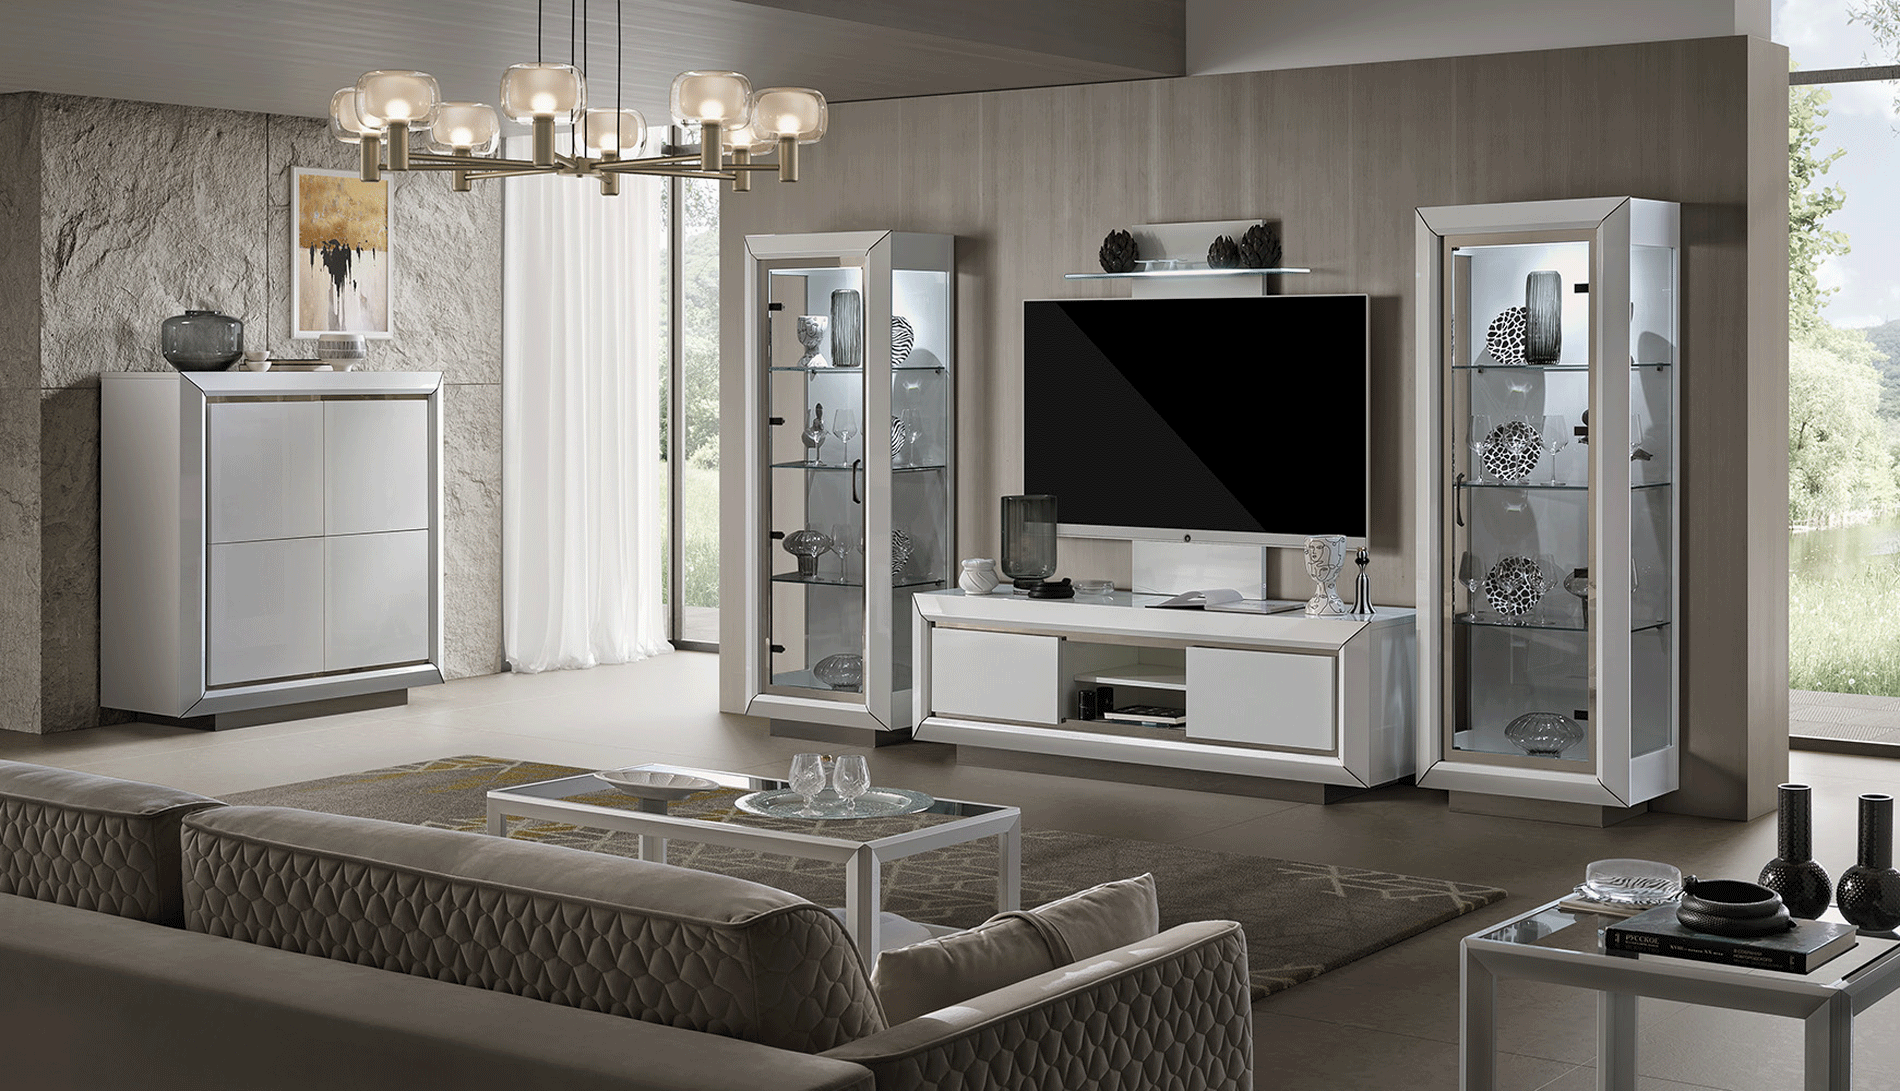 Dining Room Furniture Chairs Elite WHITE Entertainment center Additional items